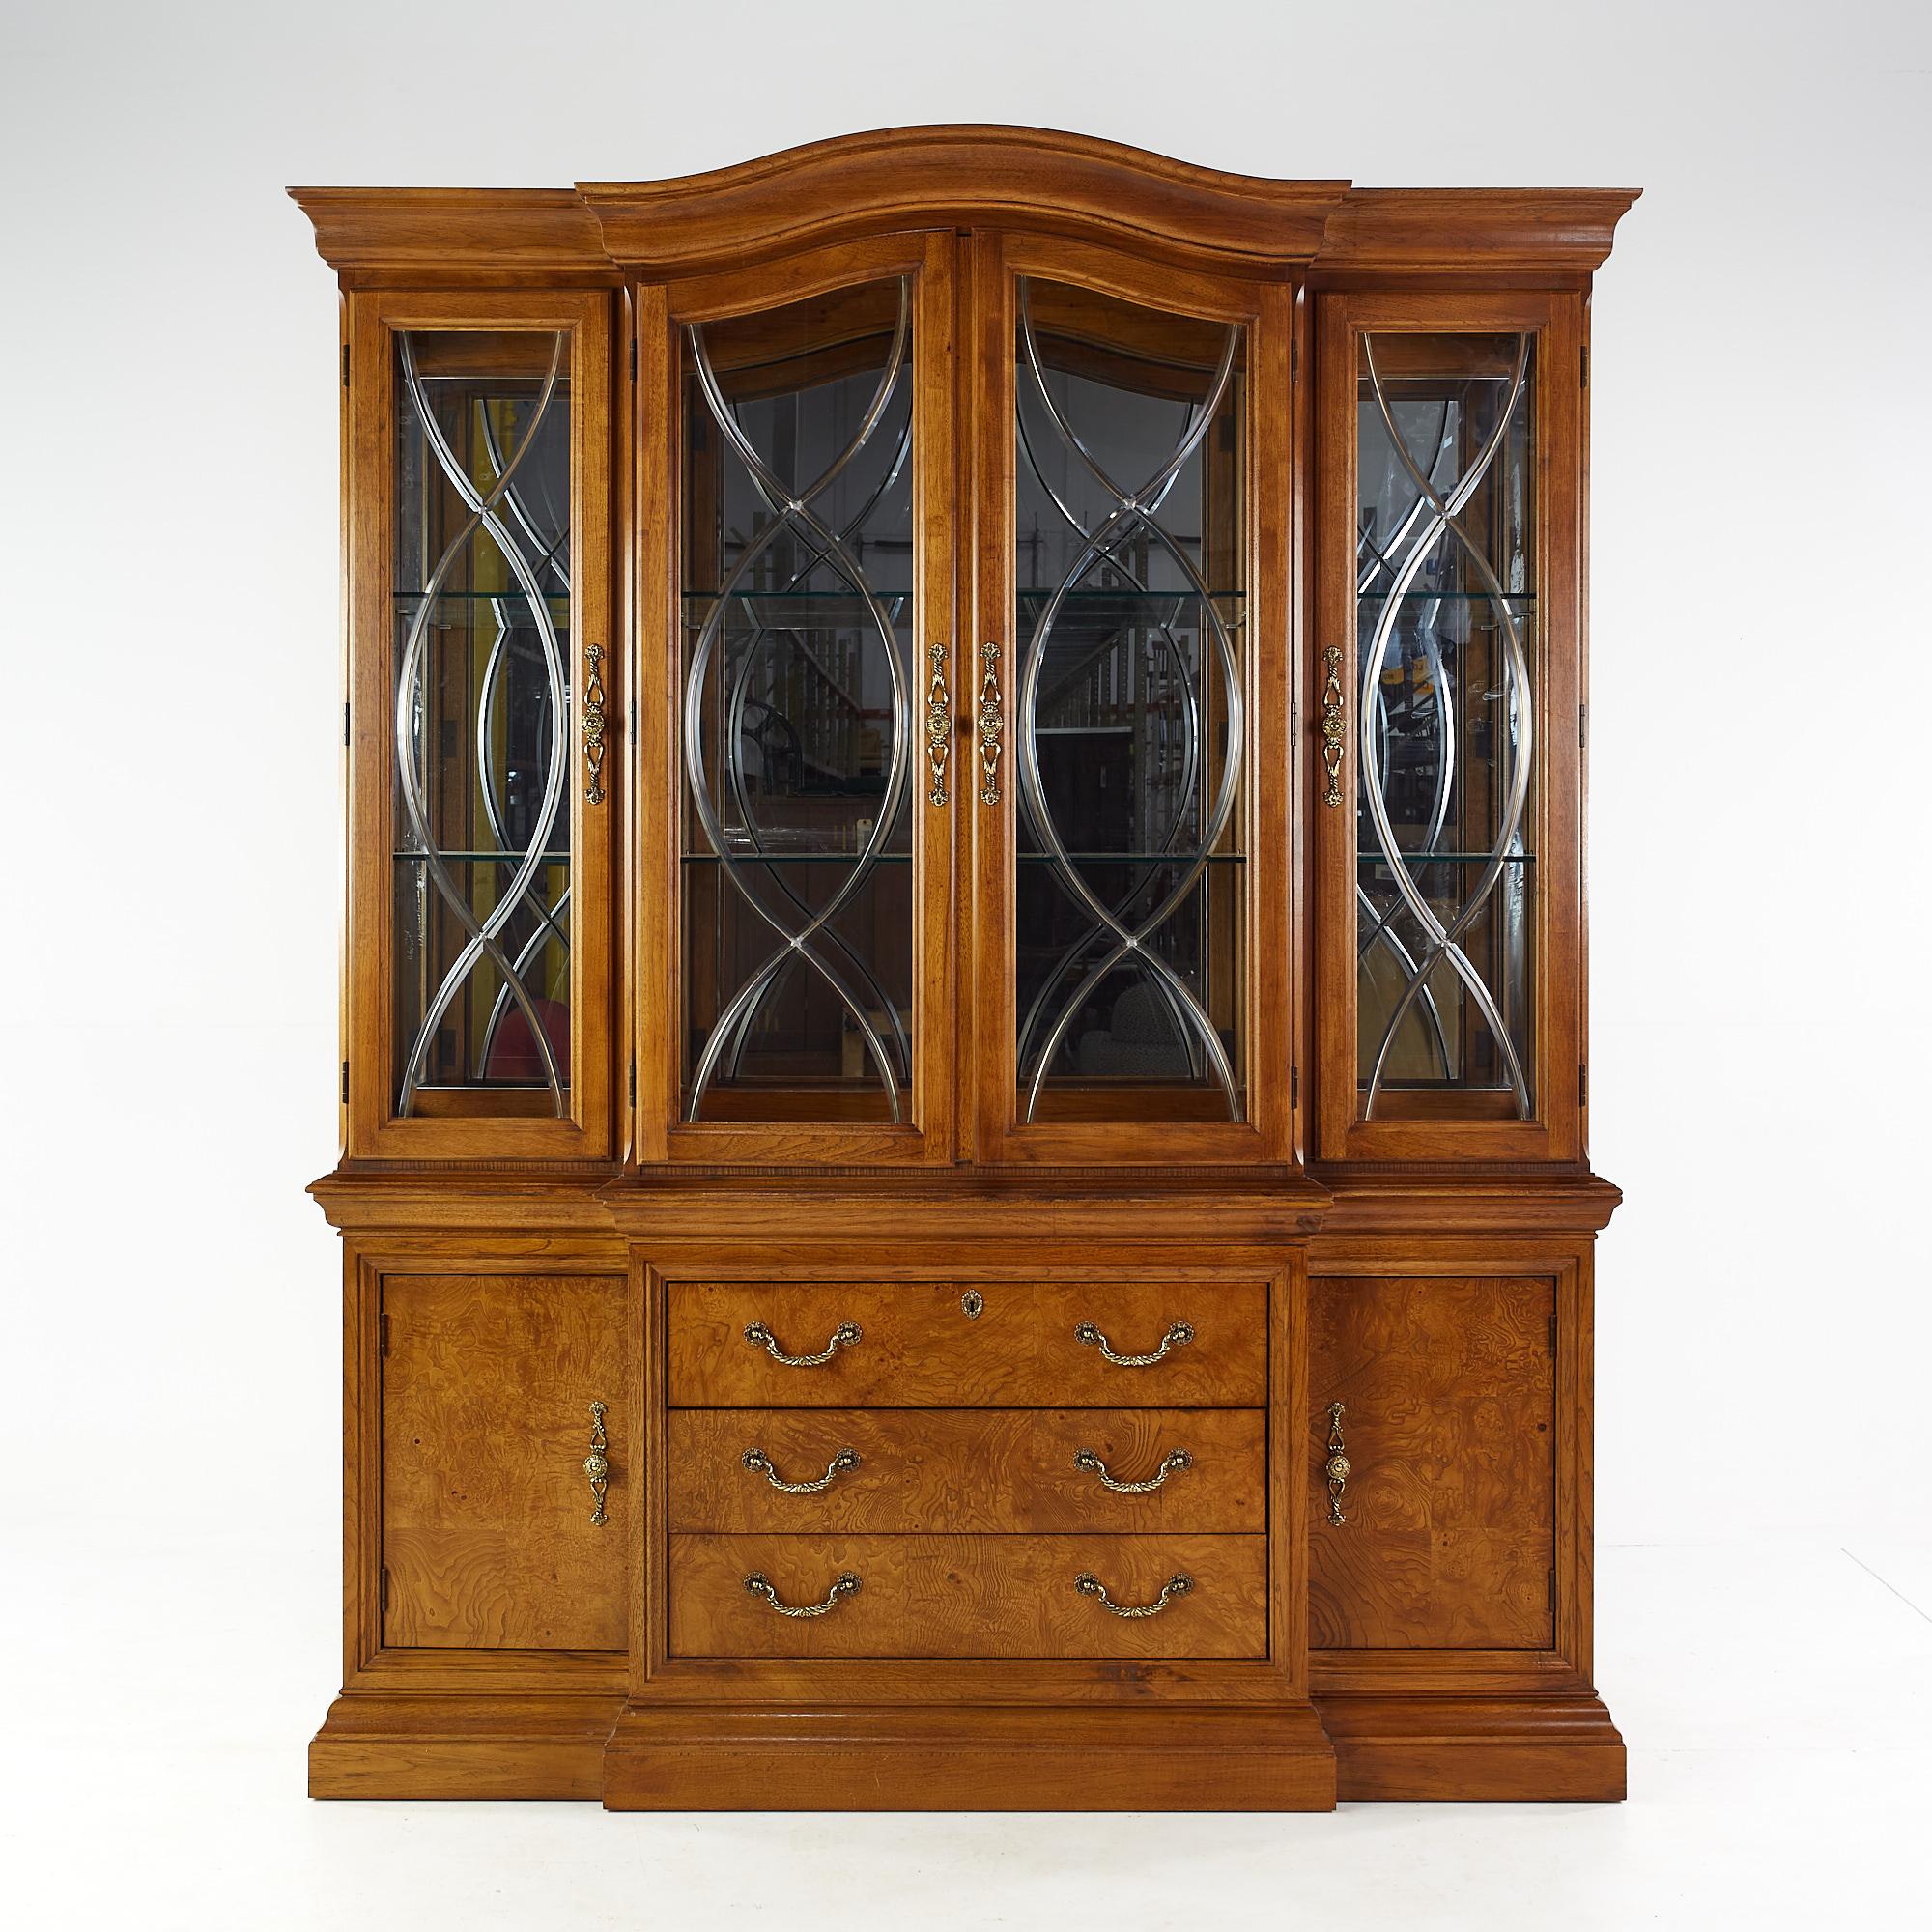 Thomasville Burlwood and walnut China cabinet

The buffet measures: 70 wide x 18 deep x 32.25 inches high
The hutch measures: 71.75 wide x 18.75 deep x 56.5 inches high
The combined height of the buffet and hutch is 88.75 inches

This piece is